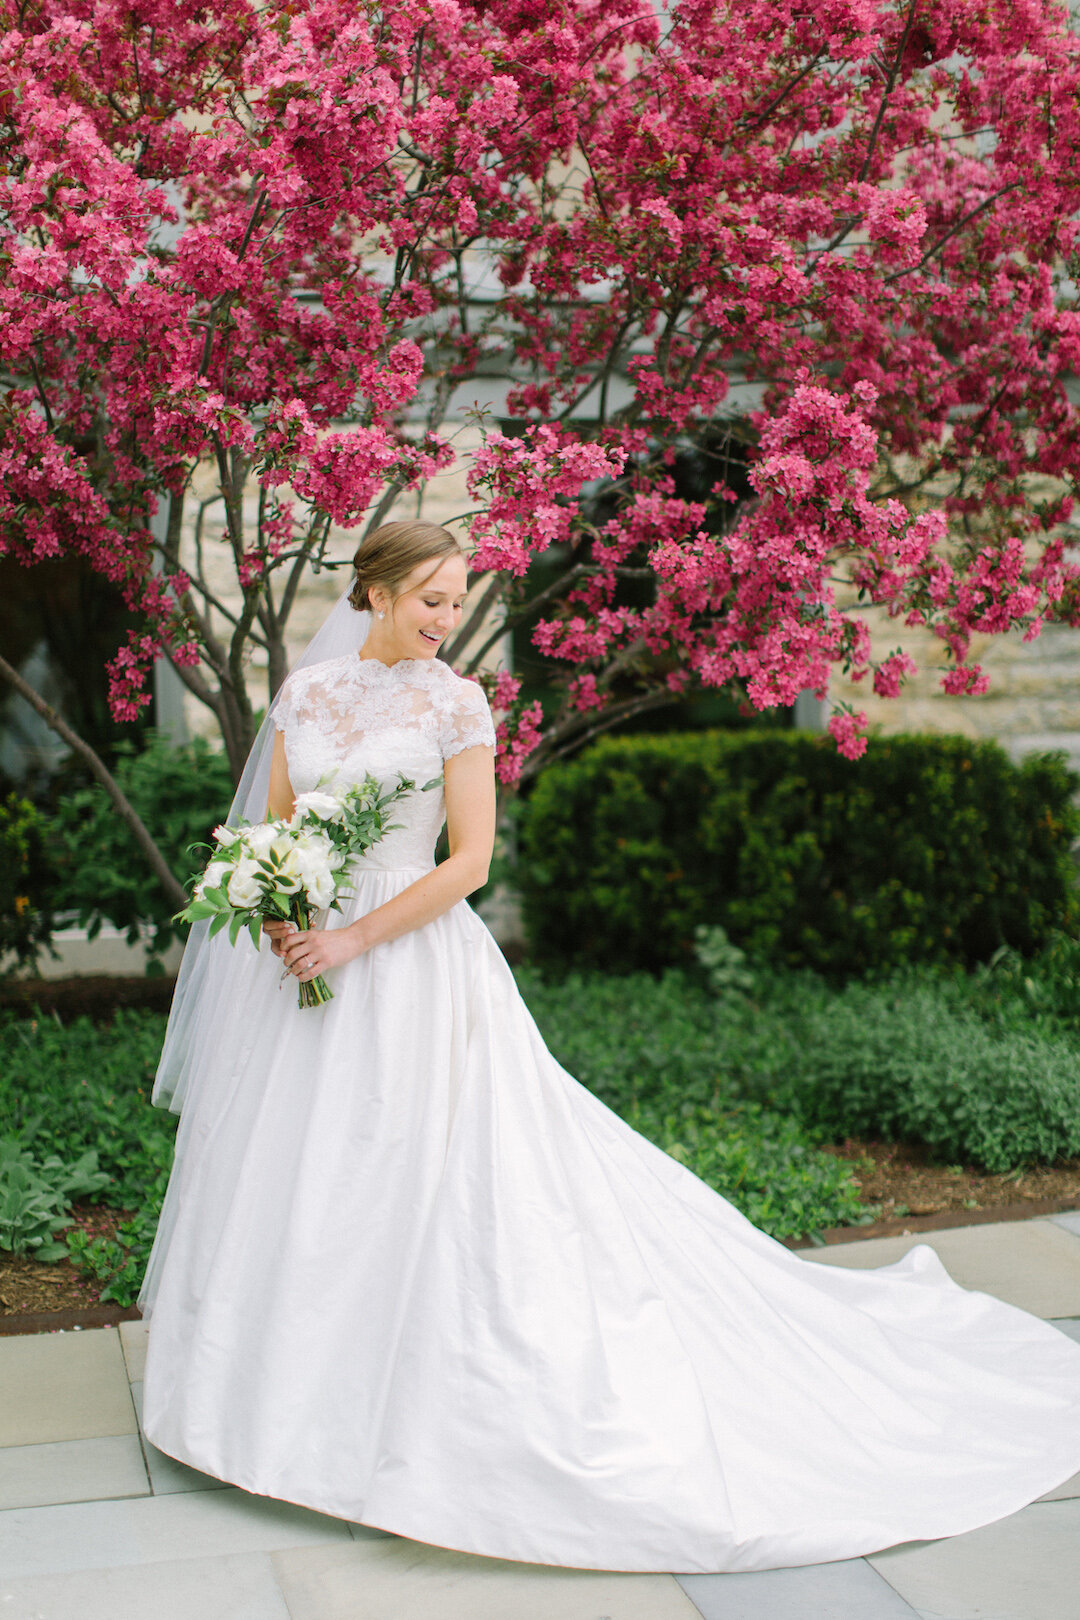 Classic Glen View Club Wedding planned by The Simply Elegant Group captured by Tim Tab Studios